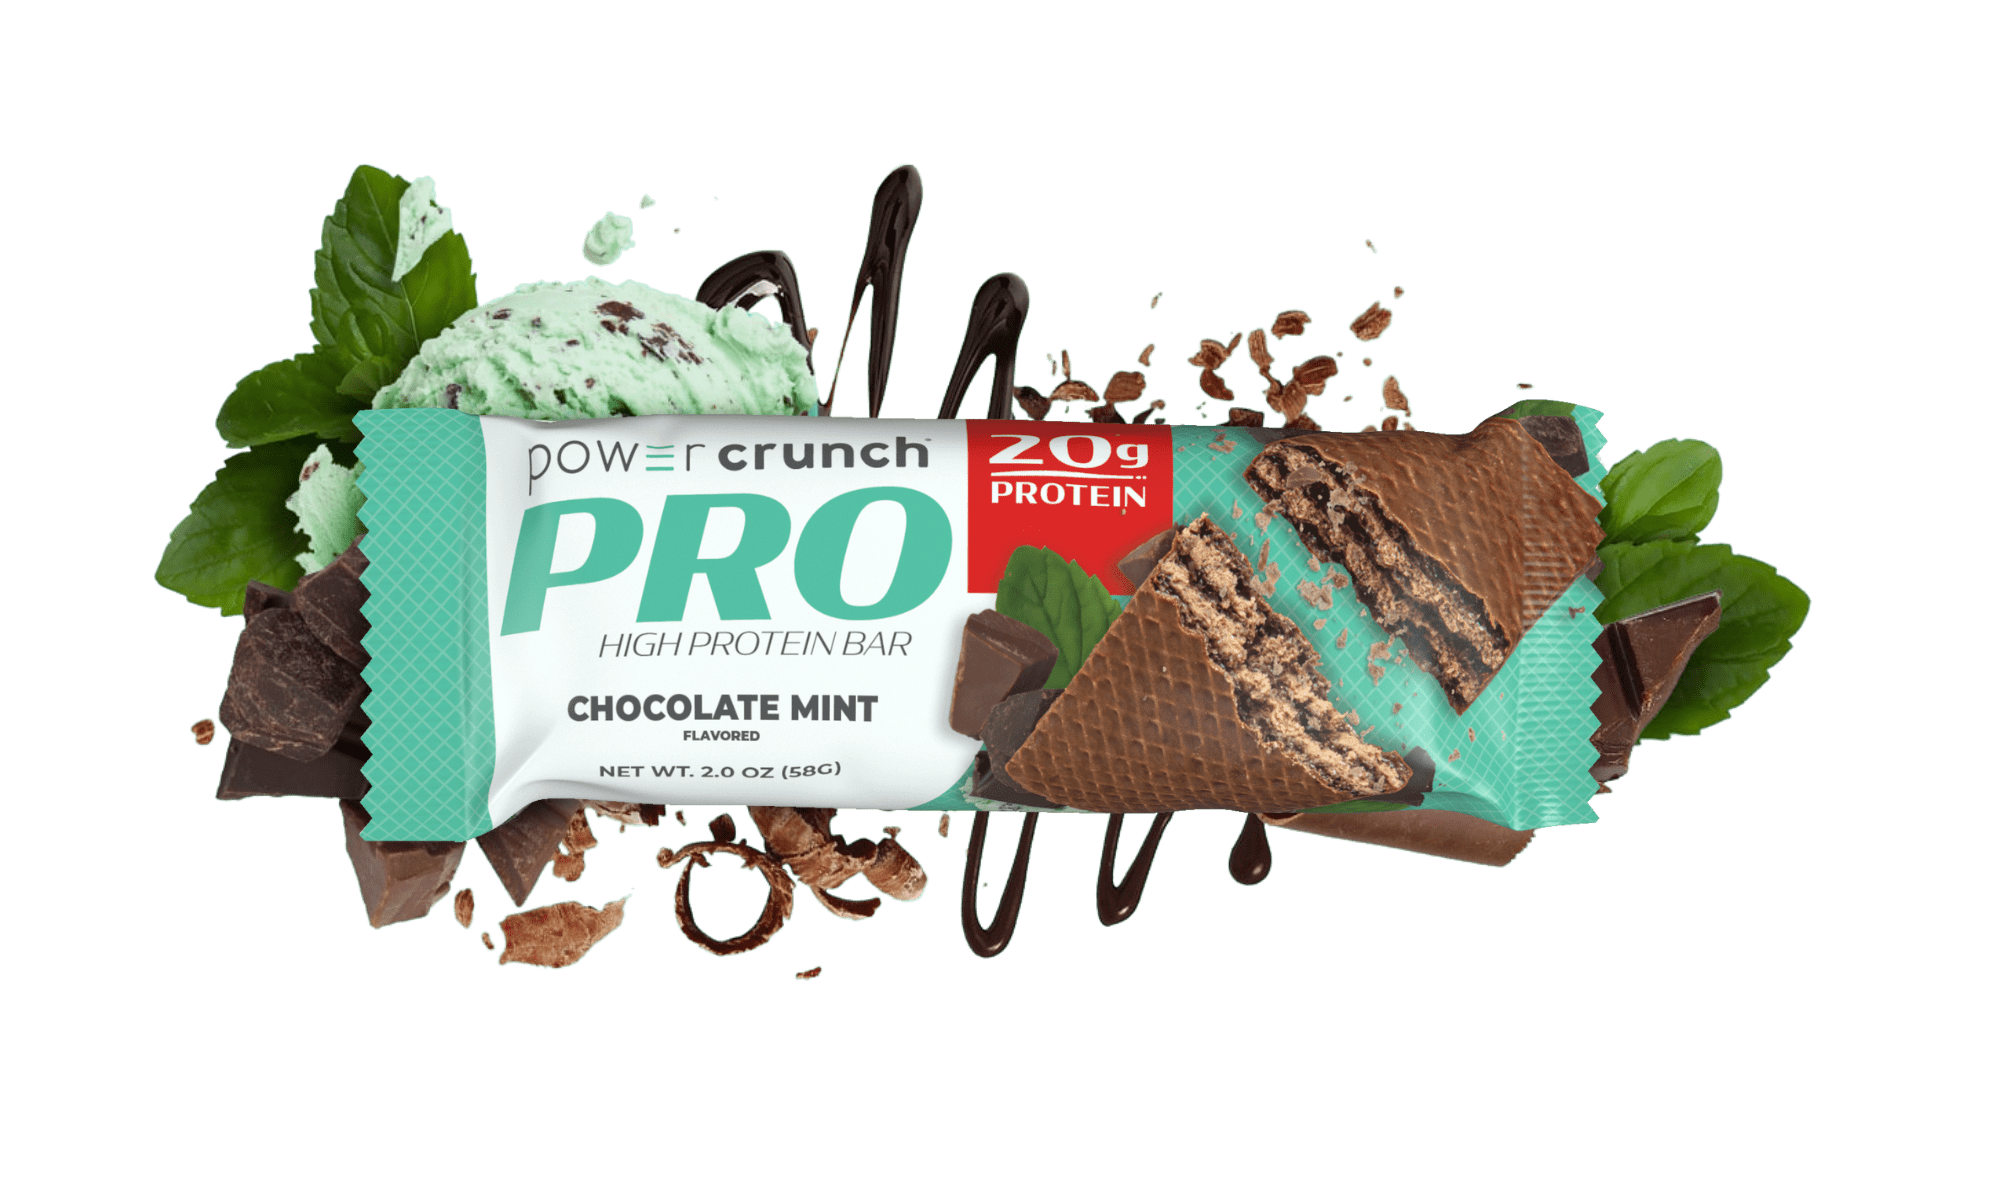 Power Crunch PRO Chocolate Mint 20g protein bars pictured with Chocolate Mint flavor explosion